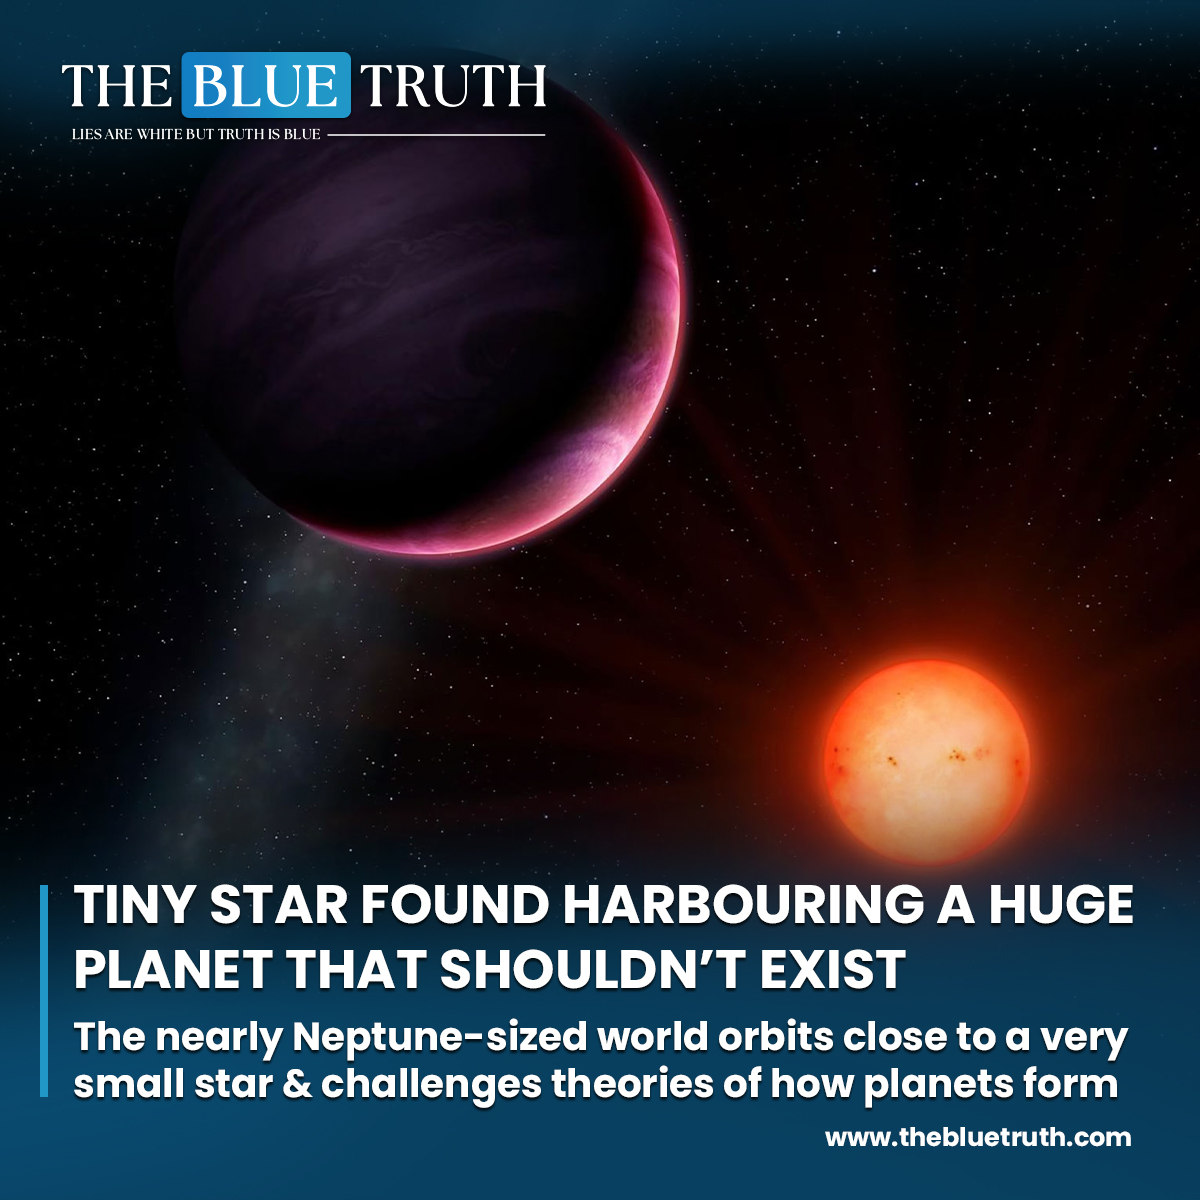 Tiny star found harbouring a huge planet that shouldn’t exist.
The nearly Neptune-sized world orbits close to a very small star and challenges theories of how planets form

#ExoplanetDiscovery #TinyStarBigPlanet #AstronomyNews #PlanetFormation #LHS3154b #TBT #TheBlueTruth